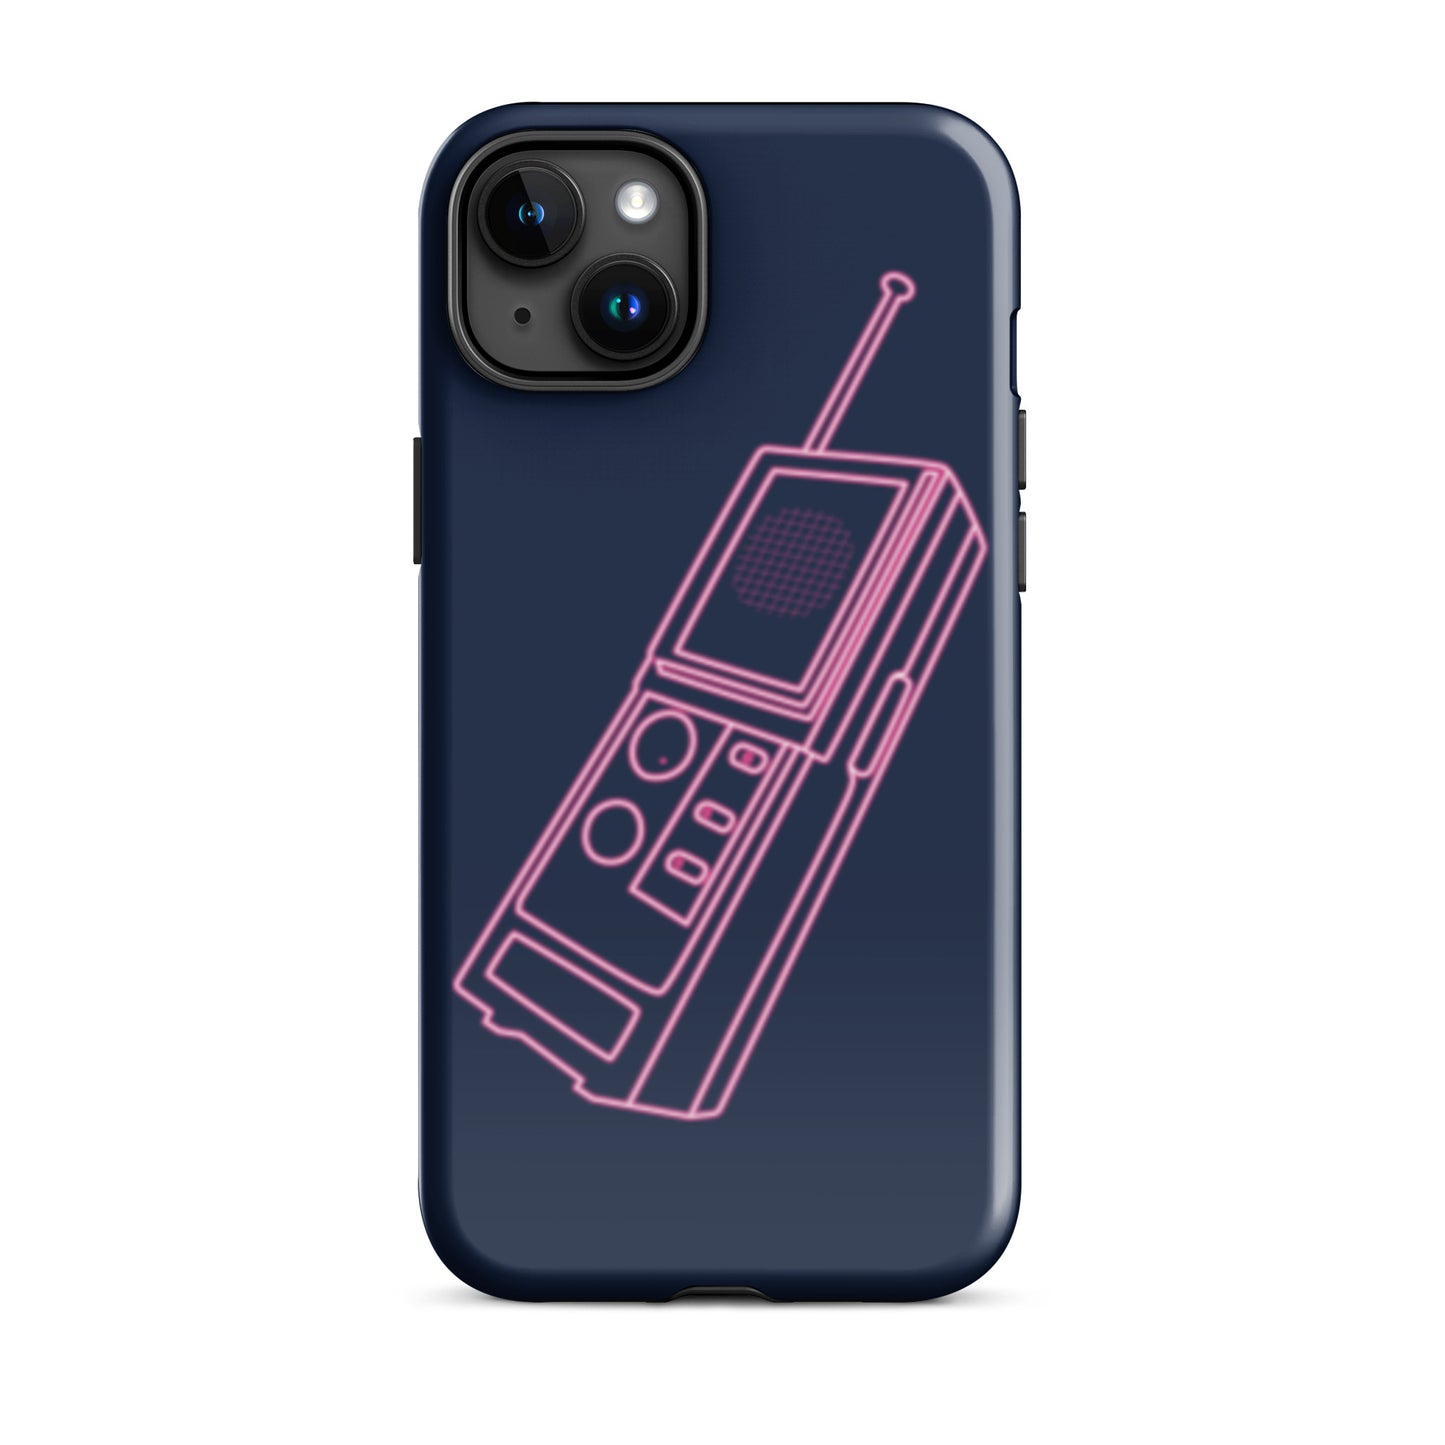 Elevate your iPhone's style with our Navy Blue Tough iPhone Case featuring a Retro WALKIE TALKIE neon graphic design. This sleek case offers durable protection against scratches and drops, keeping your device safe while making a statement. Designed for compatibility with various iPhone models, it's the perfect blend of style and toughness. Upgrade your iPhone's look and safeguard it with our Navy Blue Tough iPhone Case today!